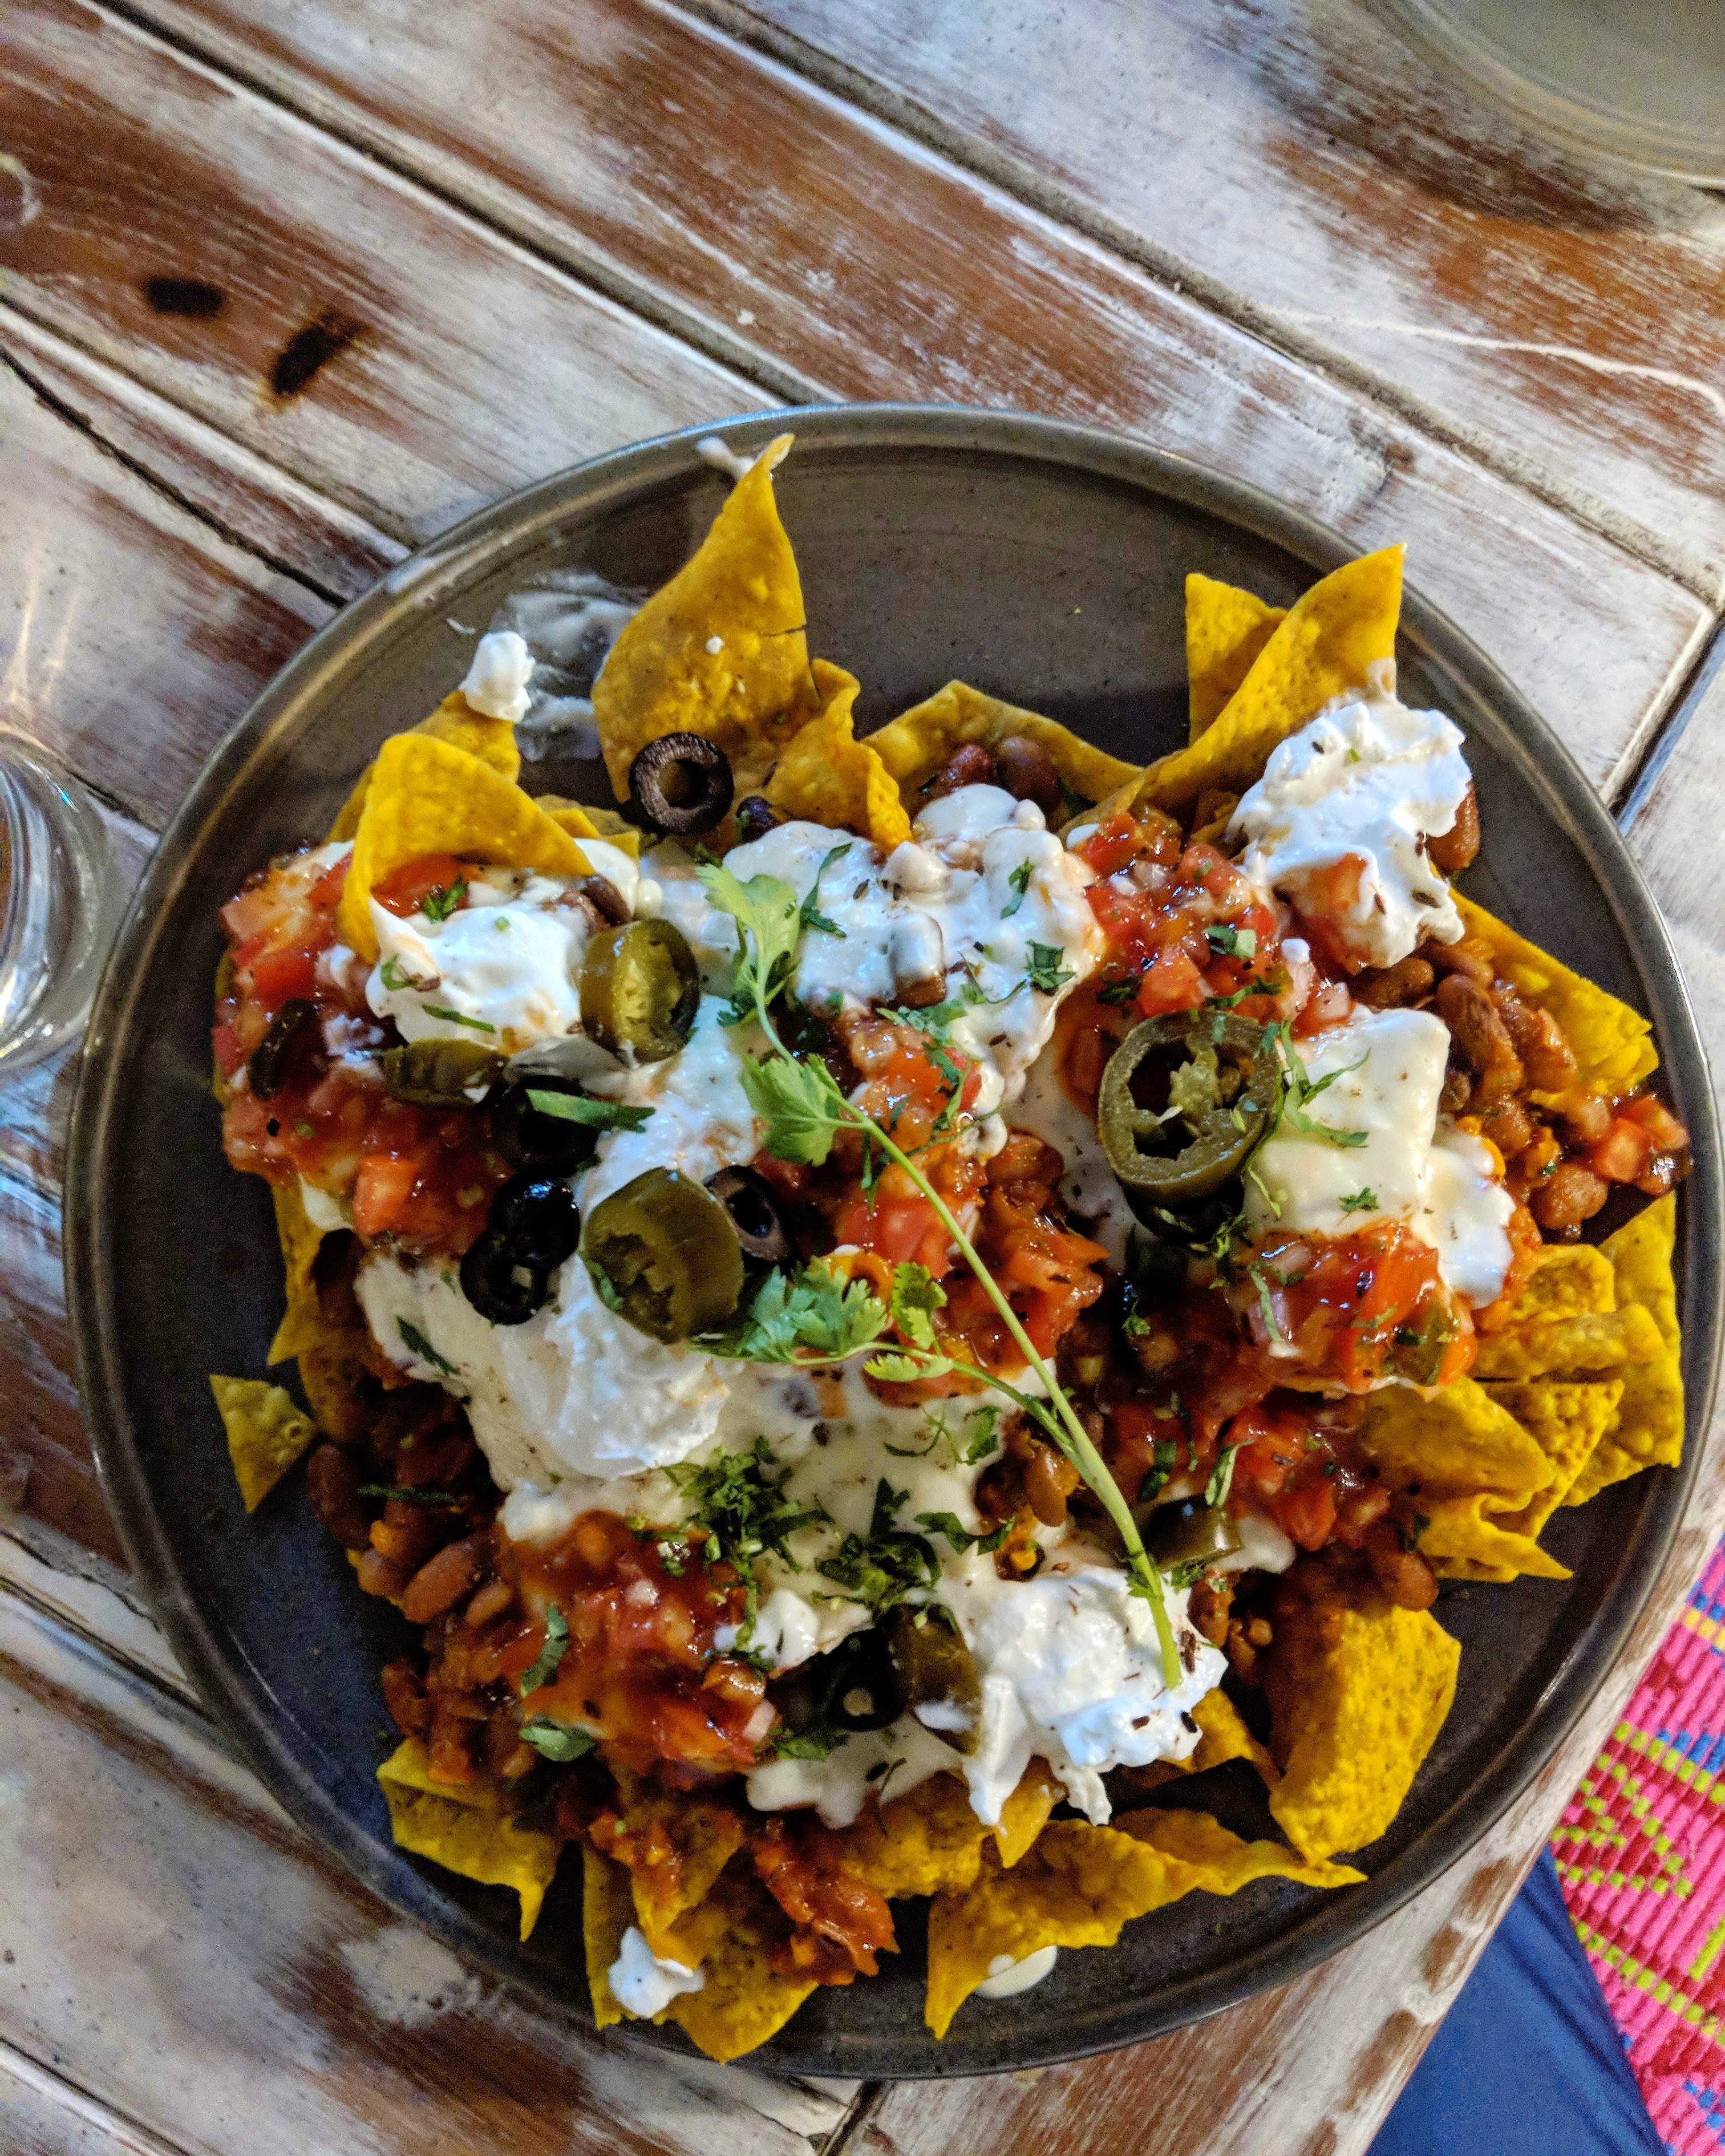 Dish,Food,Cuisine,Nachos,Ingredient,Frito pie,Produce,Recipe,Chipotle,Mexican food